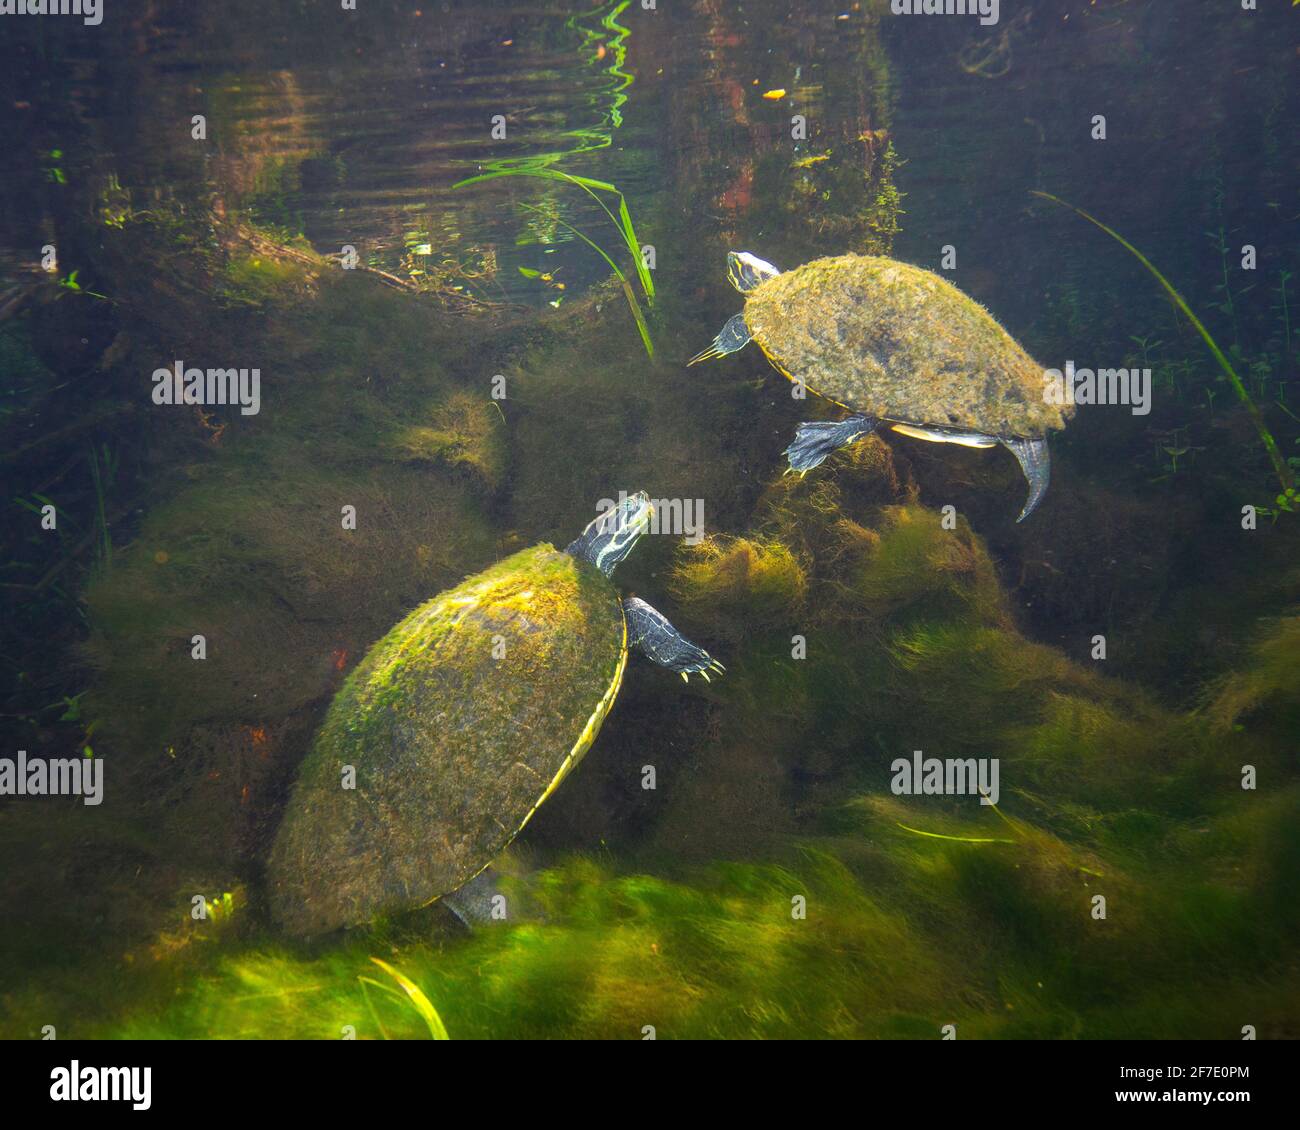 Suwannee cooter, Pseudemys concinna suwanniensis, foraging in a clear spring. Stock Photo